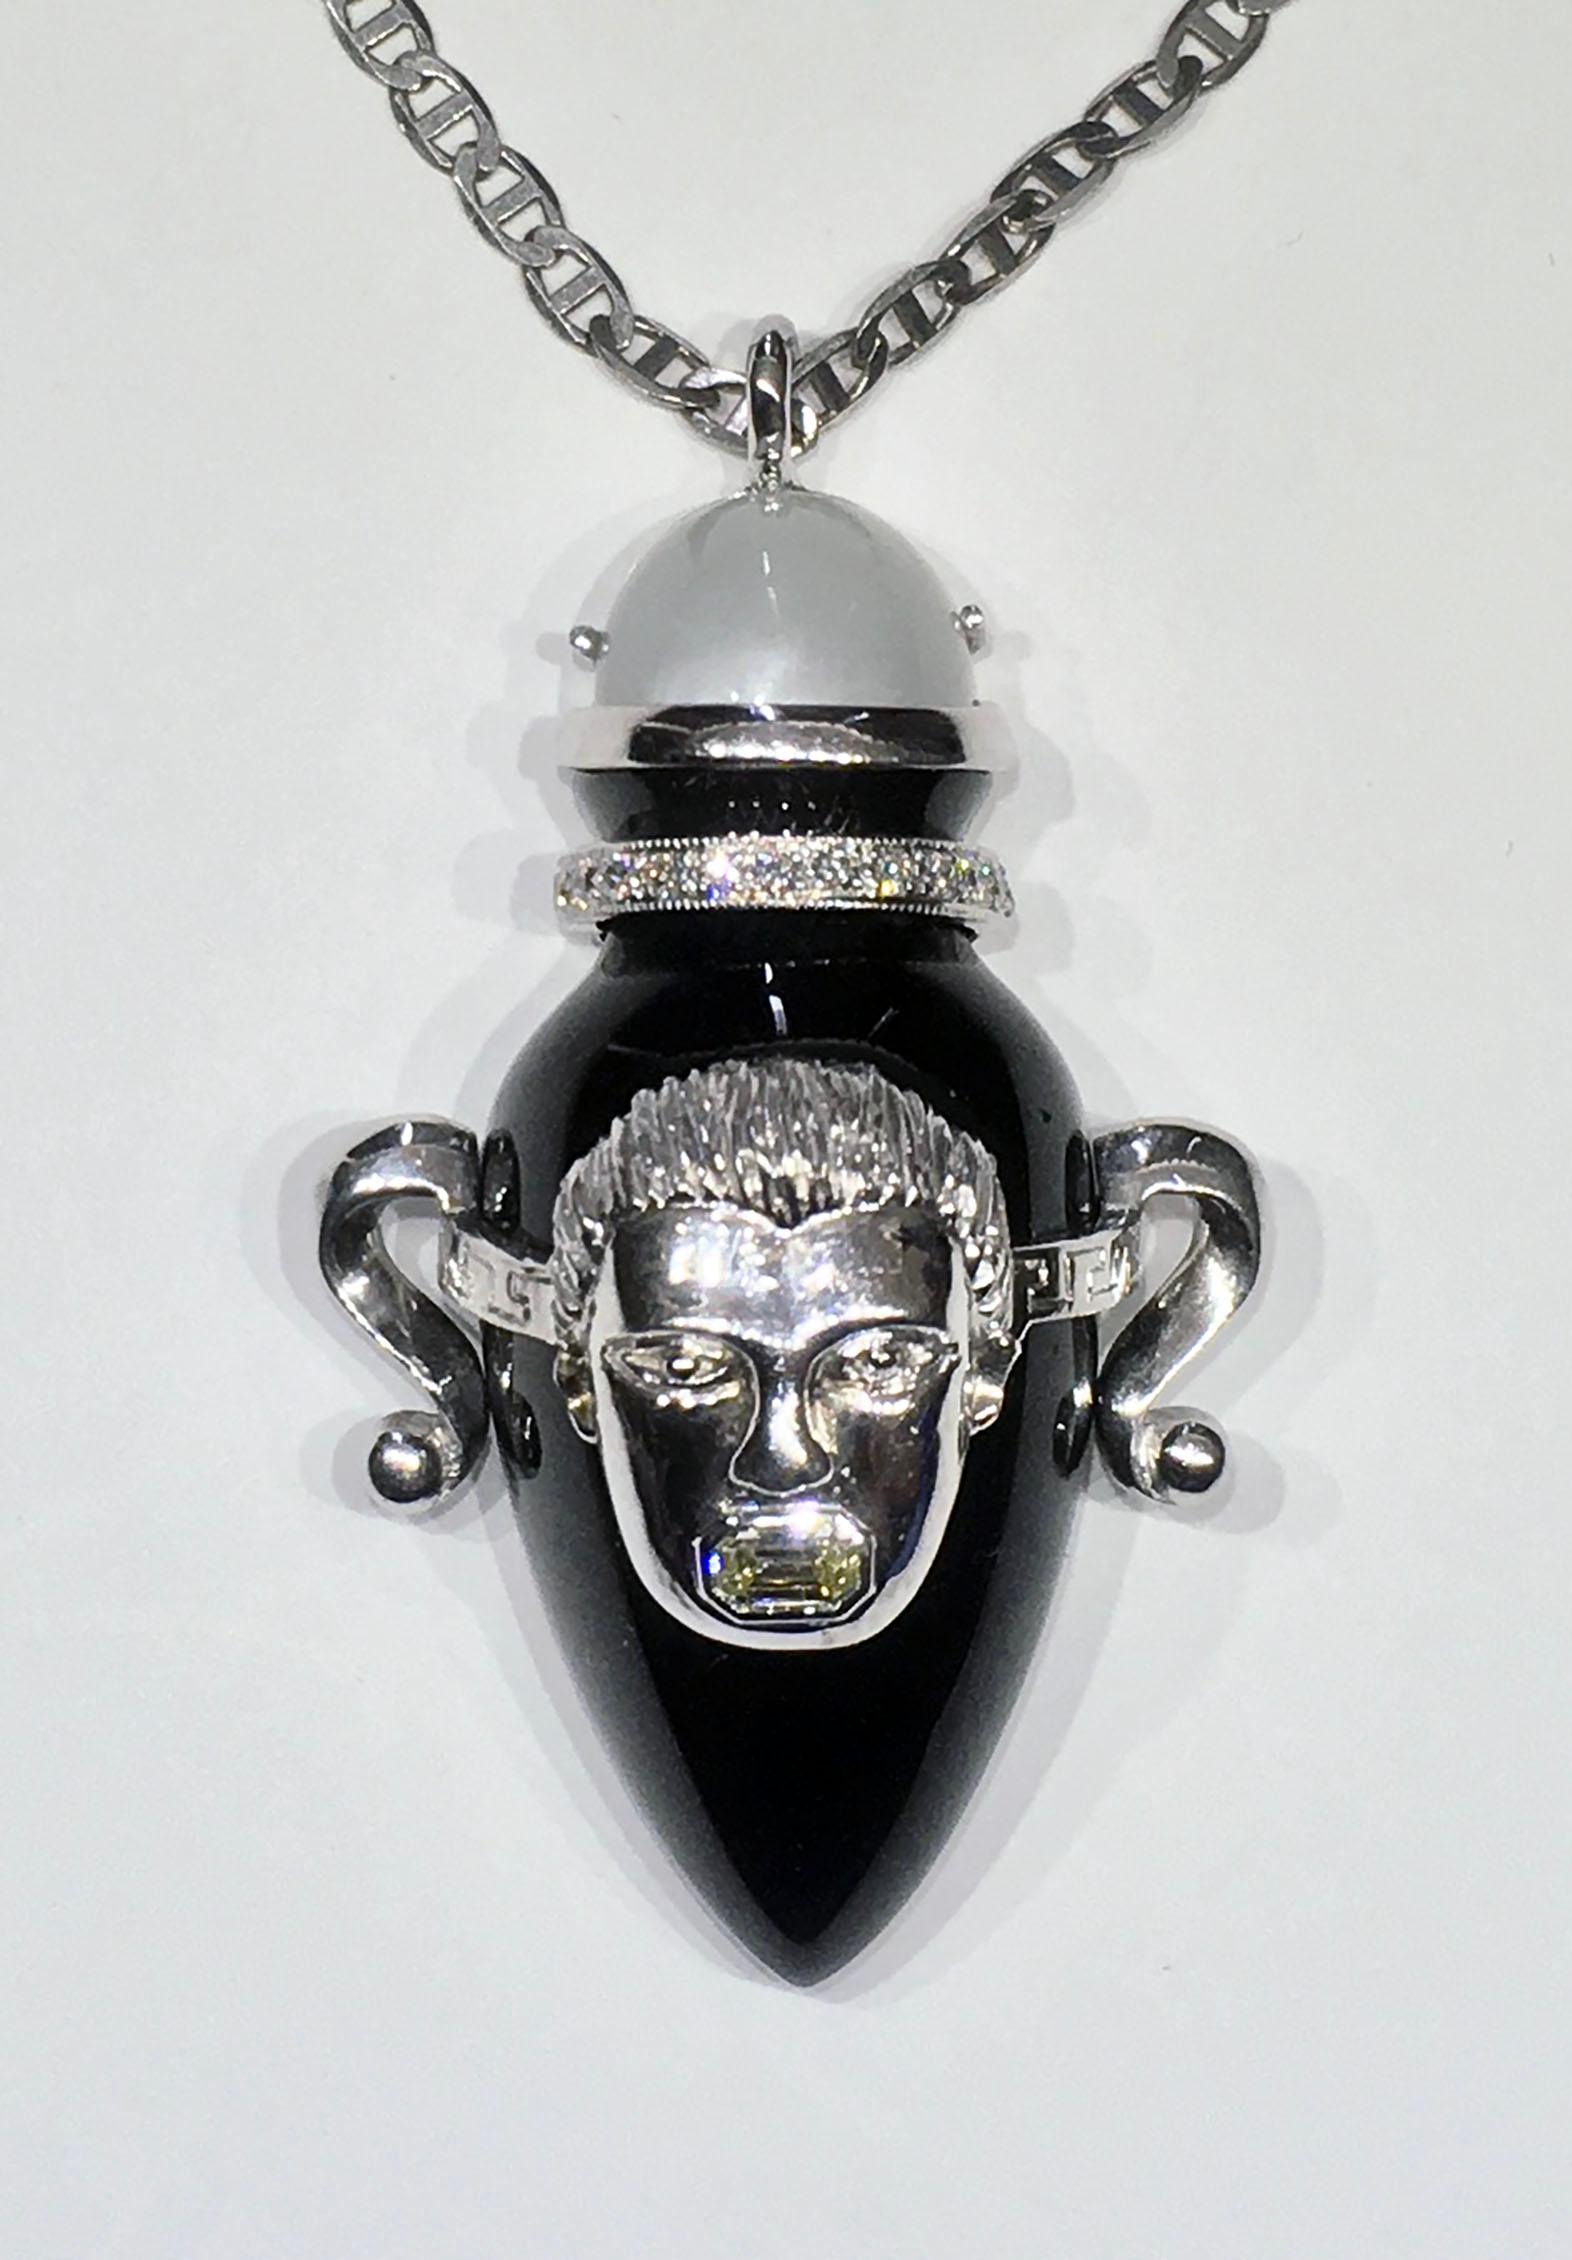 Kary Adam Designed, Silver Greek Amphora Pendant set with Moonstone, Onyx & Diamond, hanging from a 21 Inch 18kt White Gold Chain. This Pendant is Fashioned from a 188 Carat Black Onyx, Capped with a 2.9 Carat Moonstone Cabochon and Accented with